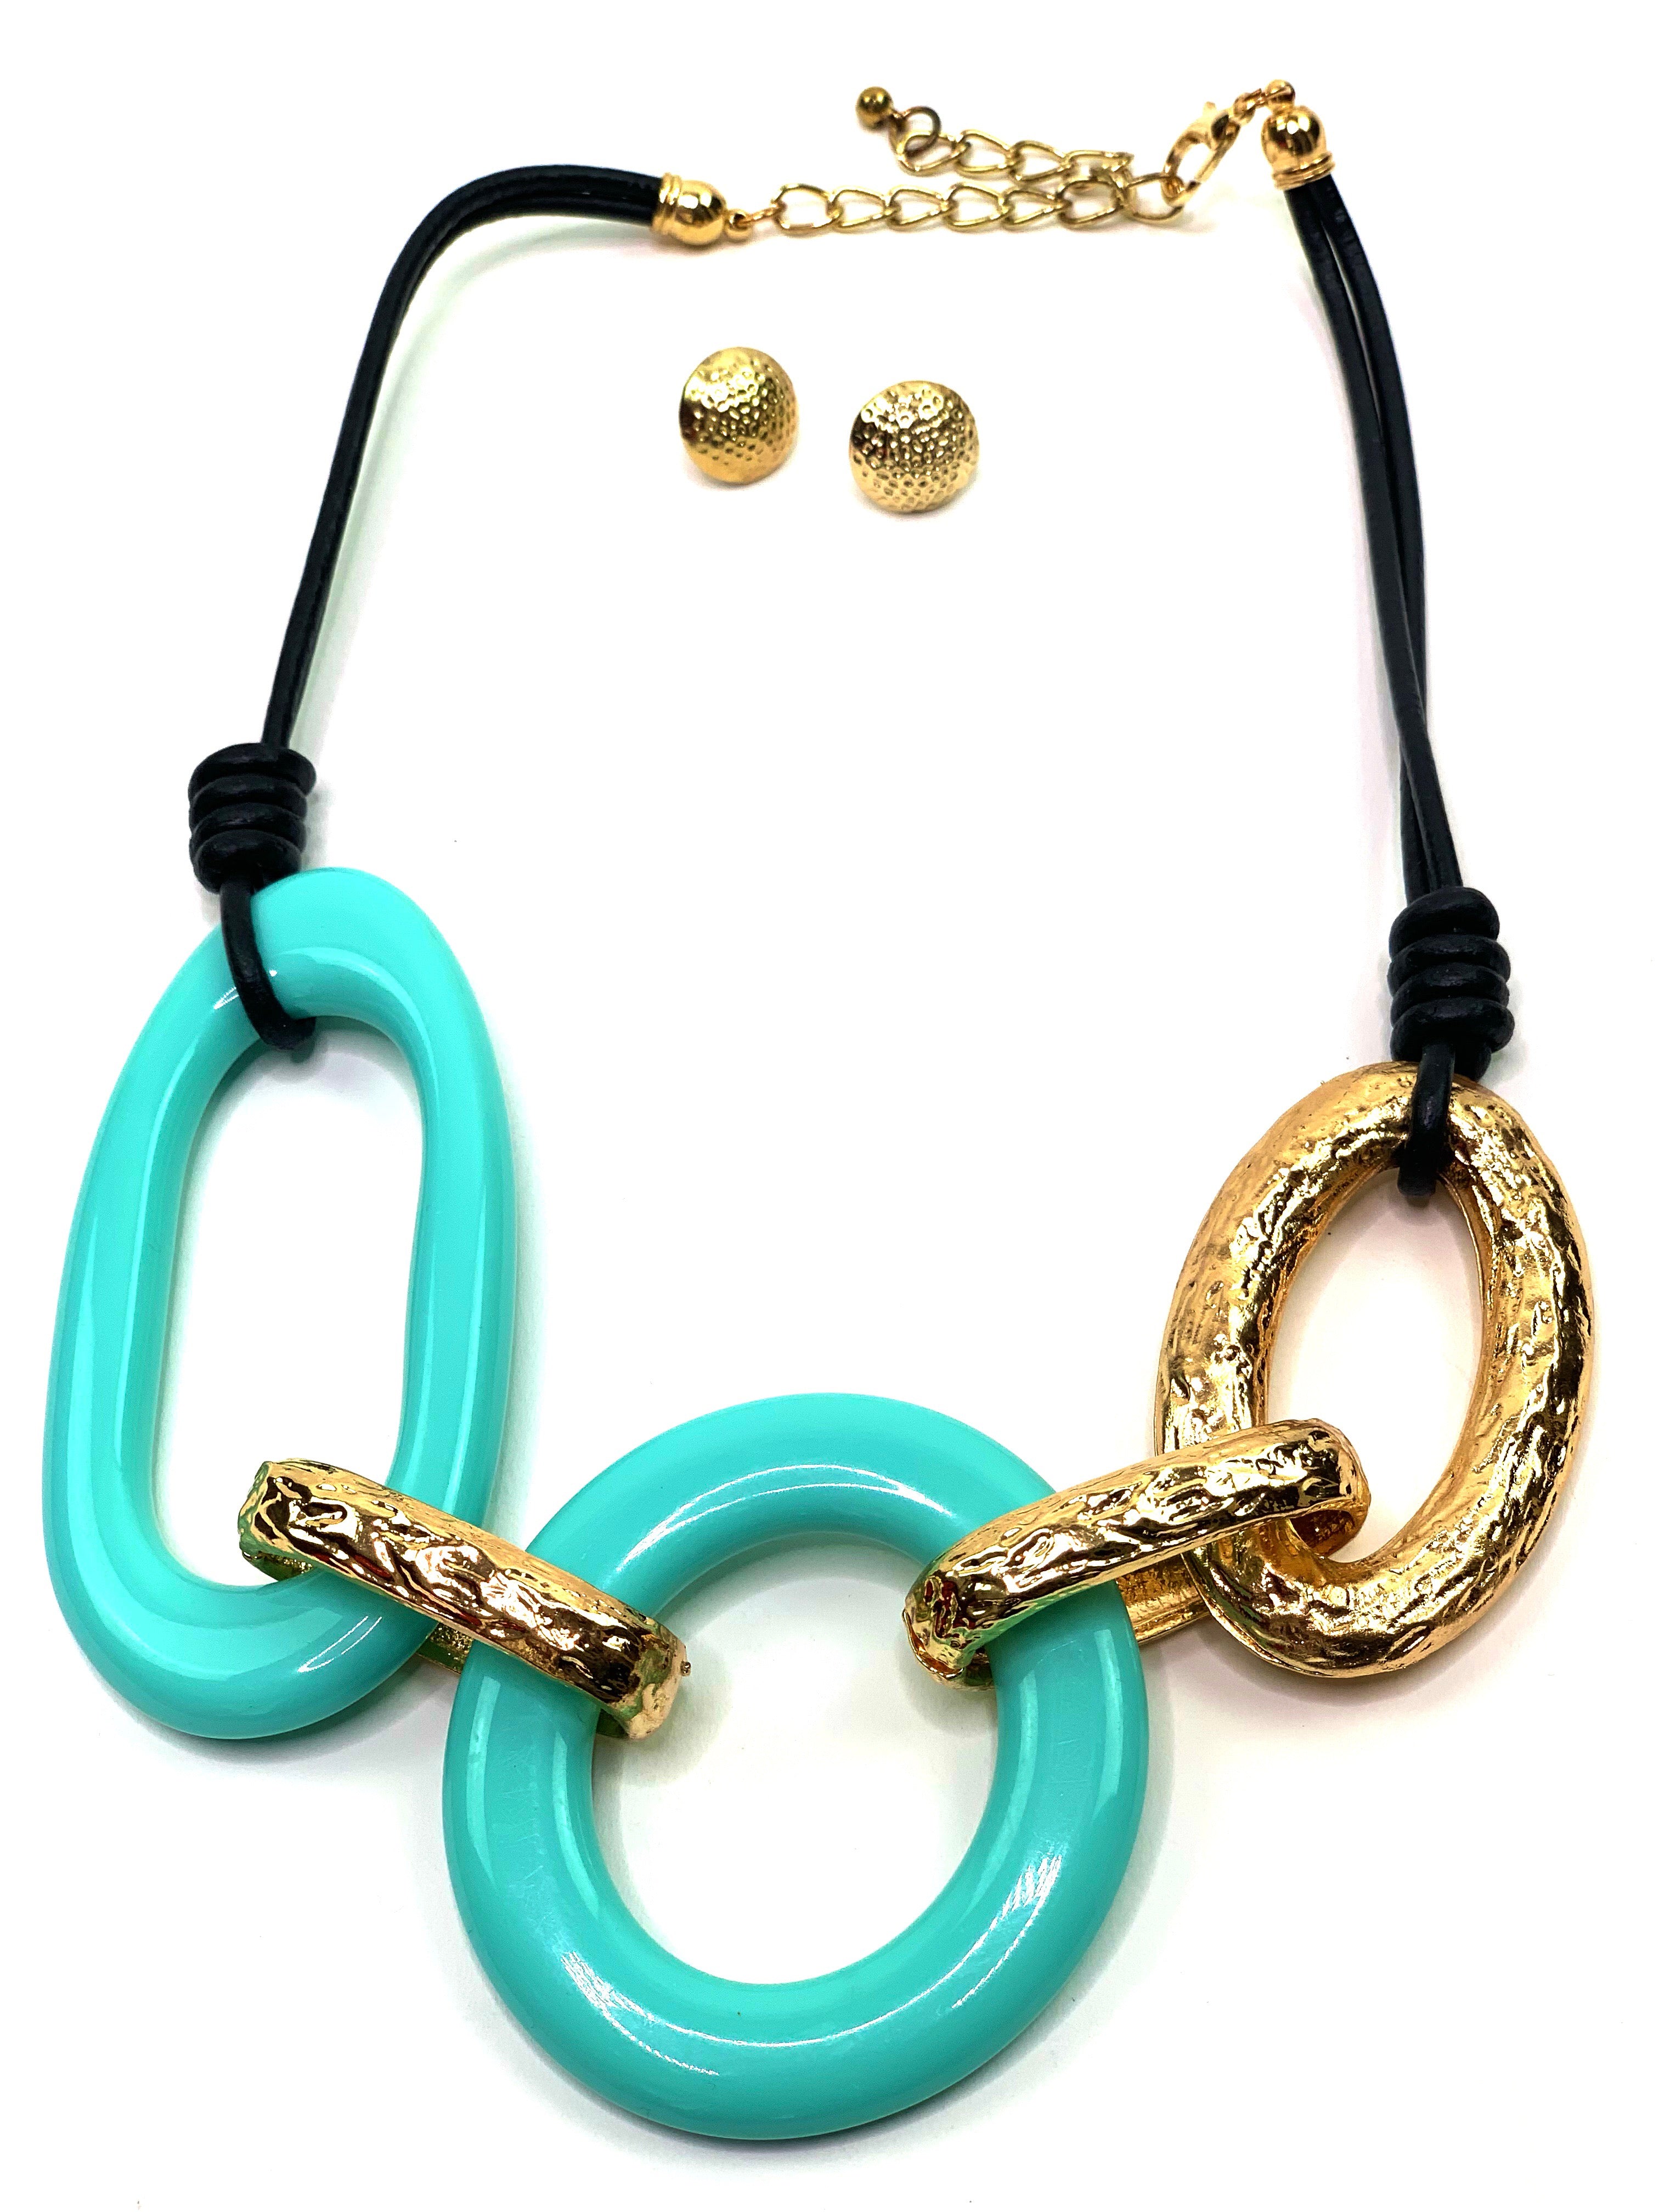 Gold and Aqua Necklace Set - Jewellery Unique Gifts & Accessories